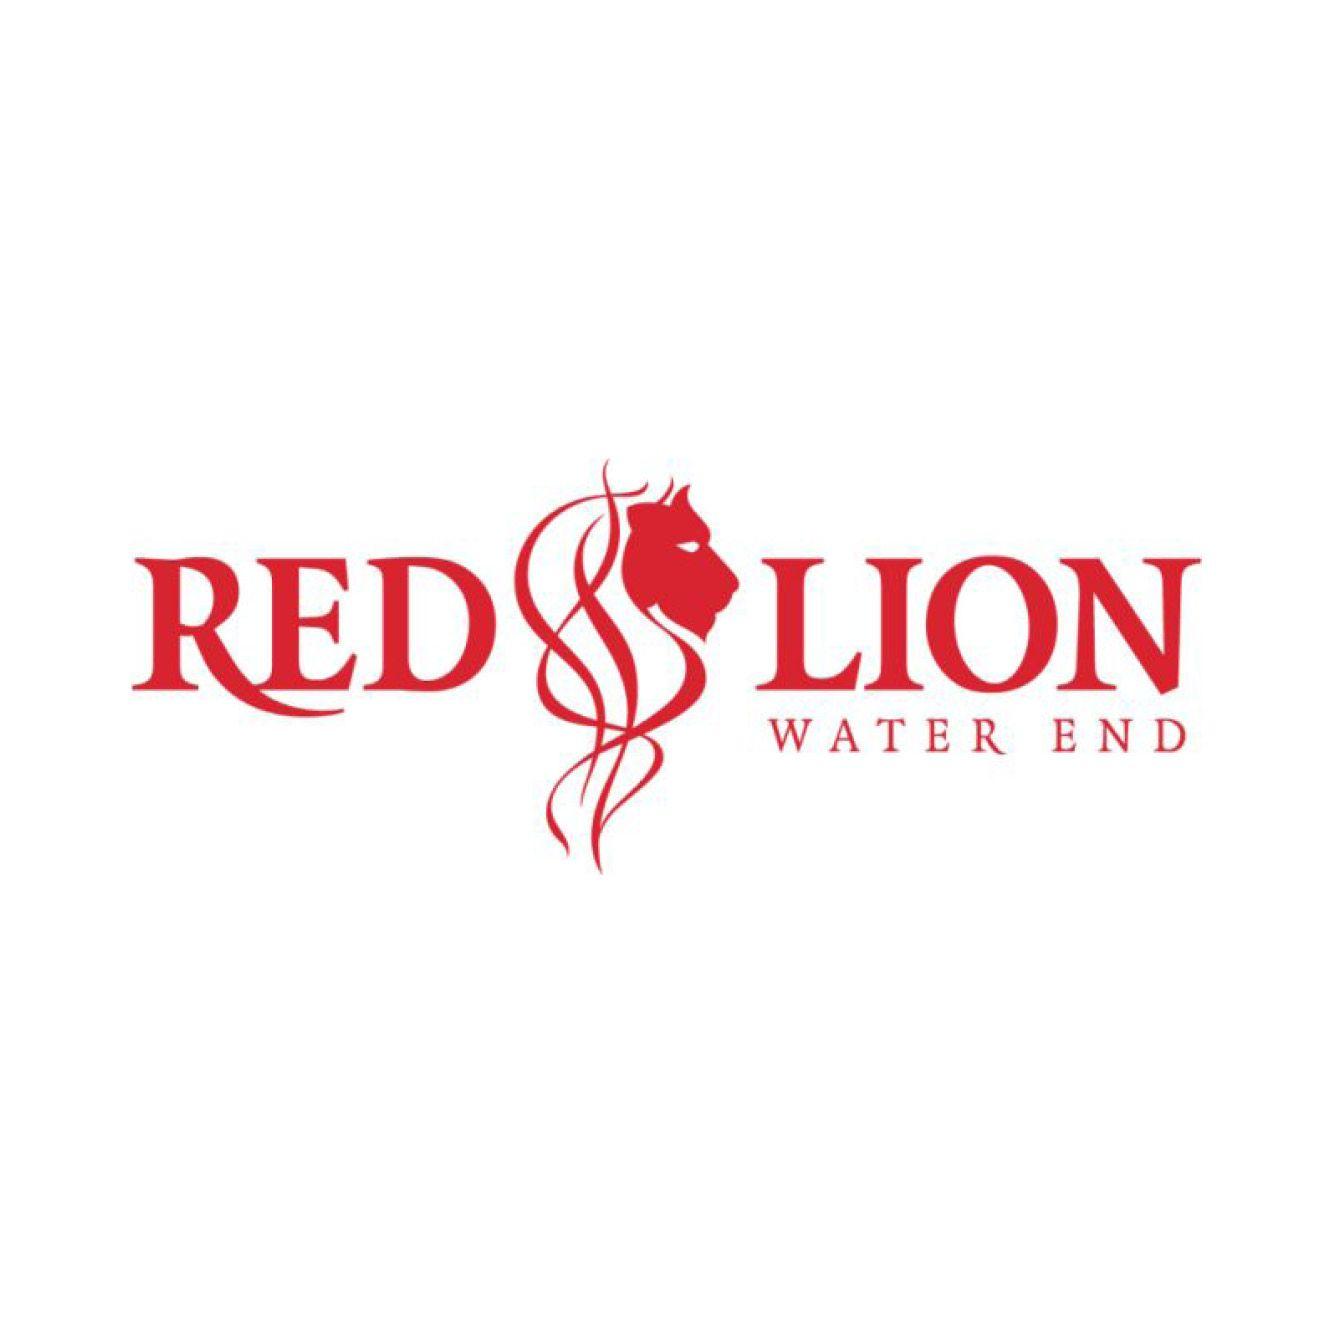 Red Lion Water Logo - 100% NYE at The Red Lion, Water End. London New Years Eve Party